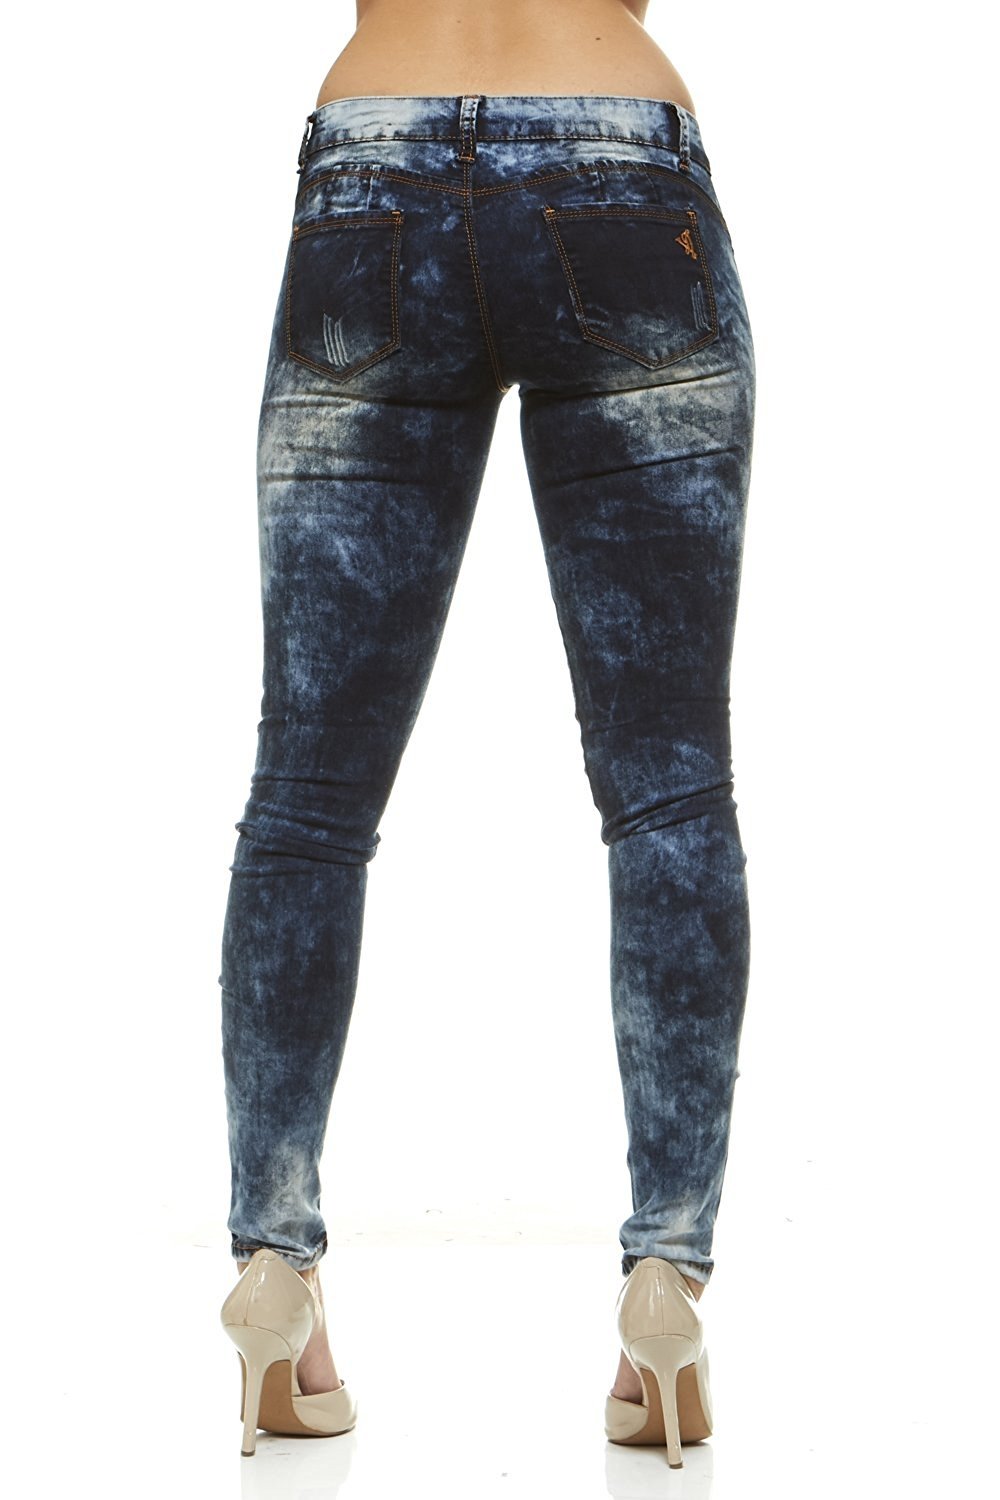 VIP JEANS Classic Skinny Jeans For Teen Girls Slim Fit Stretch Stone Washed Jeans In Junior or Plus Size - image 3 of 10